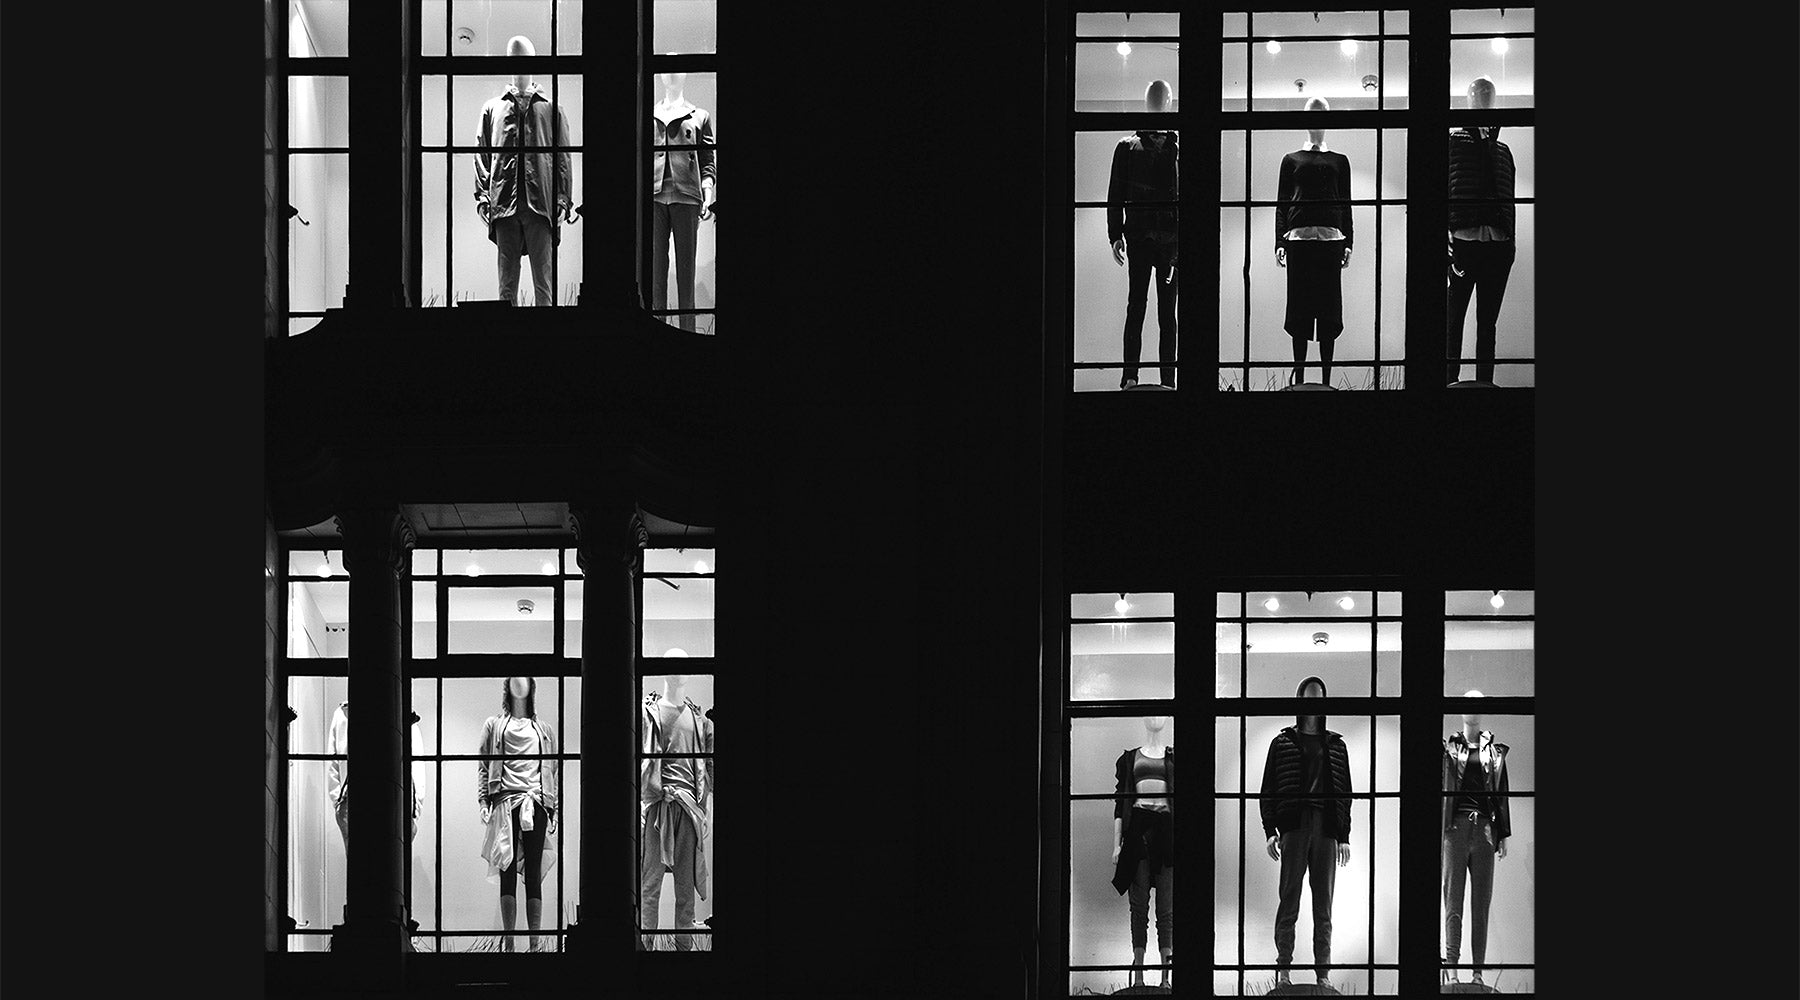 mannequins in two-story storefront windows at night